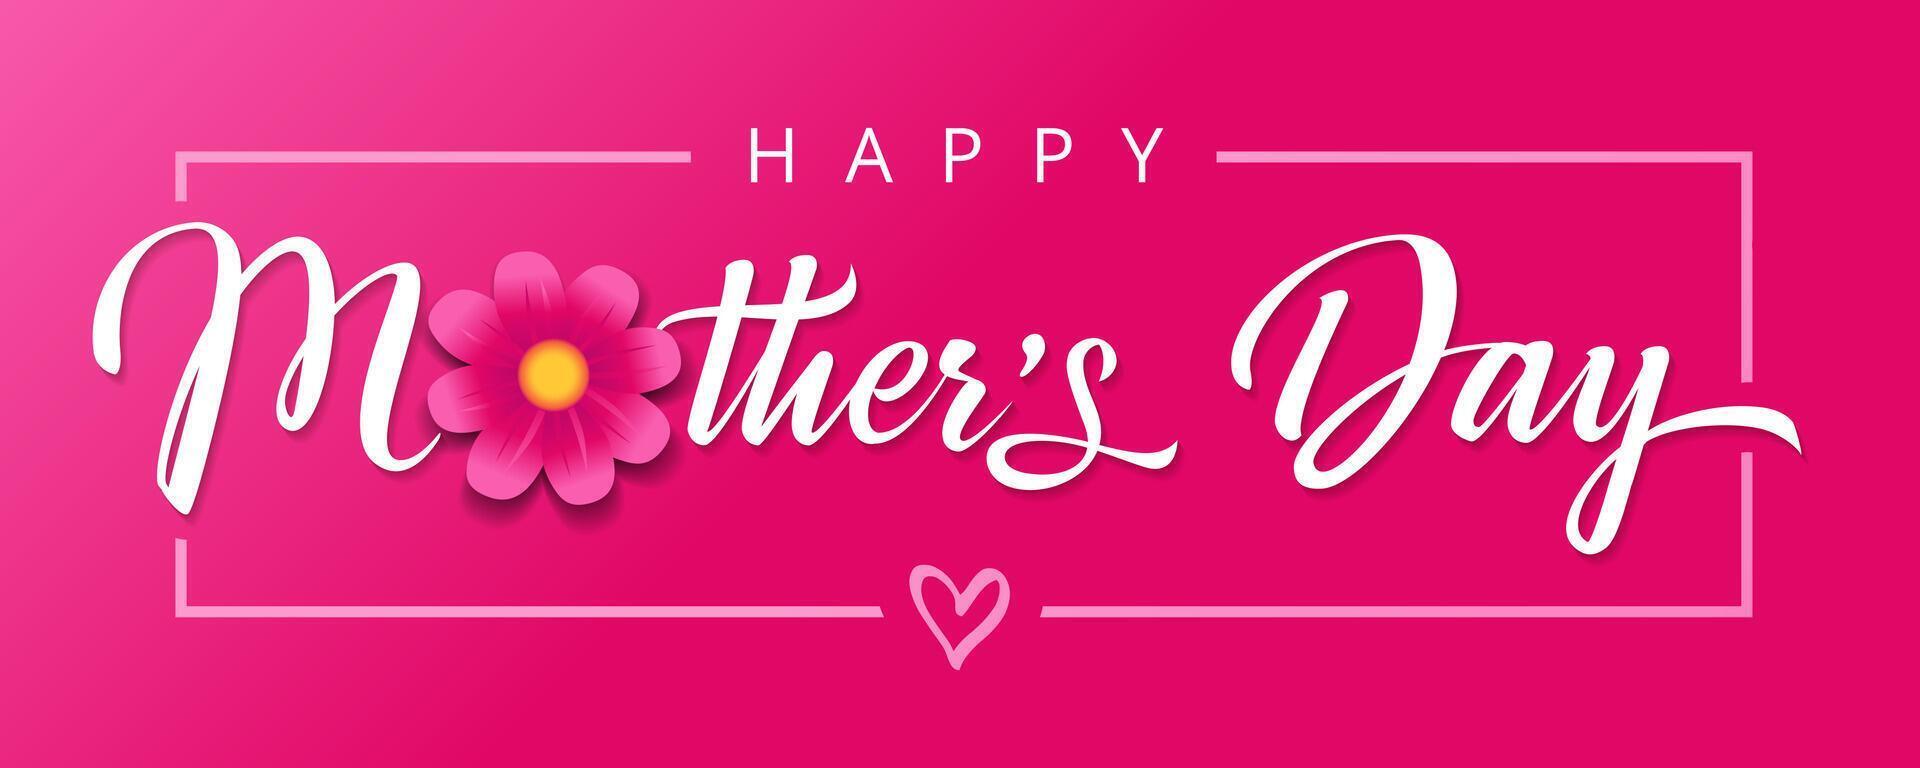 Happy Mother's day congrats concept. Decorative horizontal greetings with floral elements vector